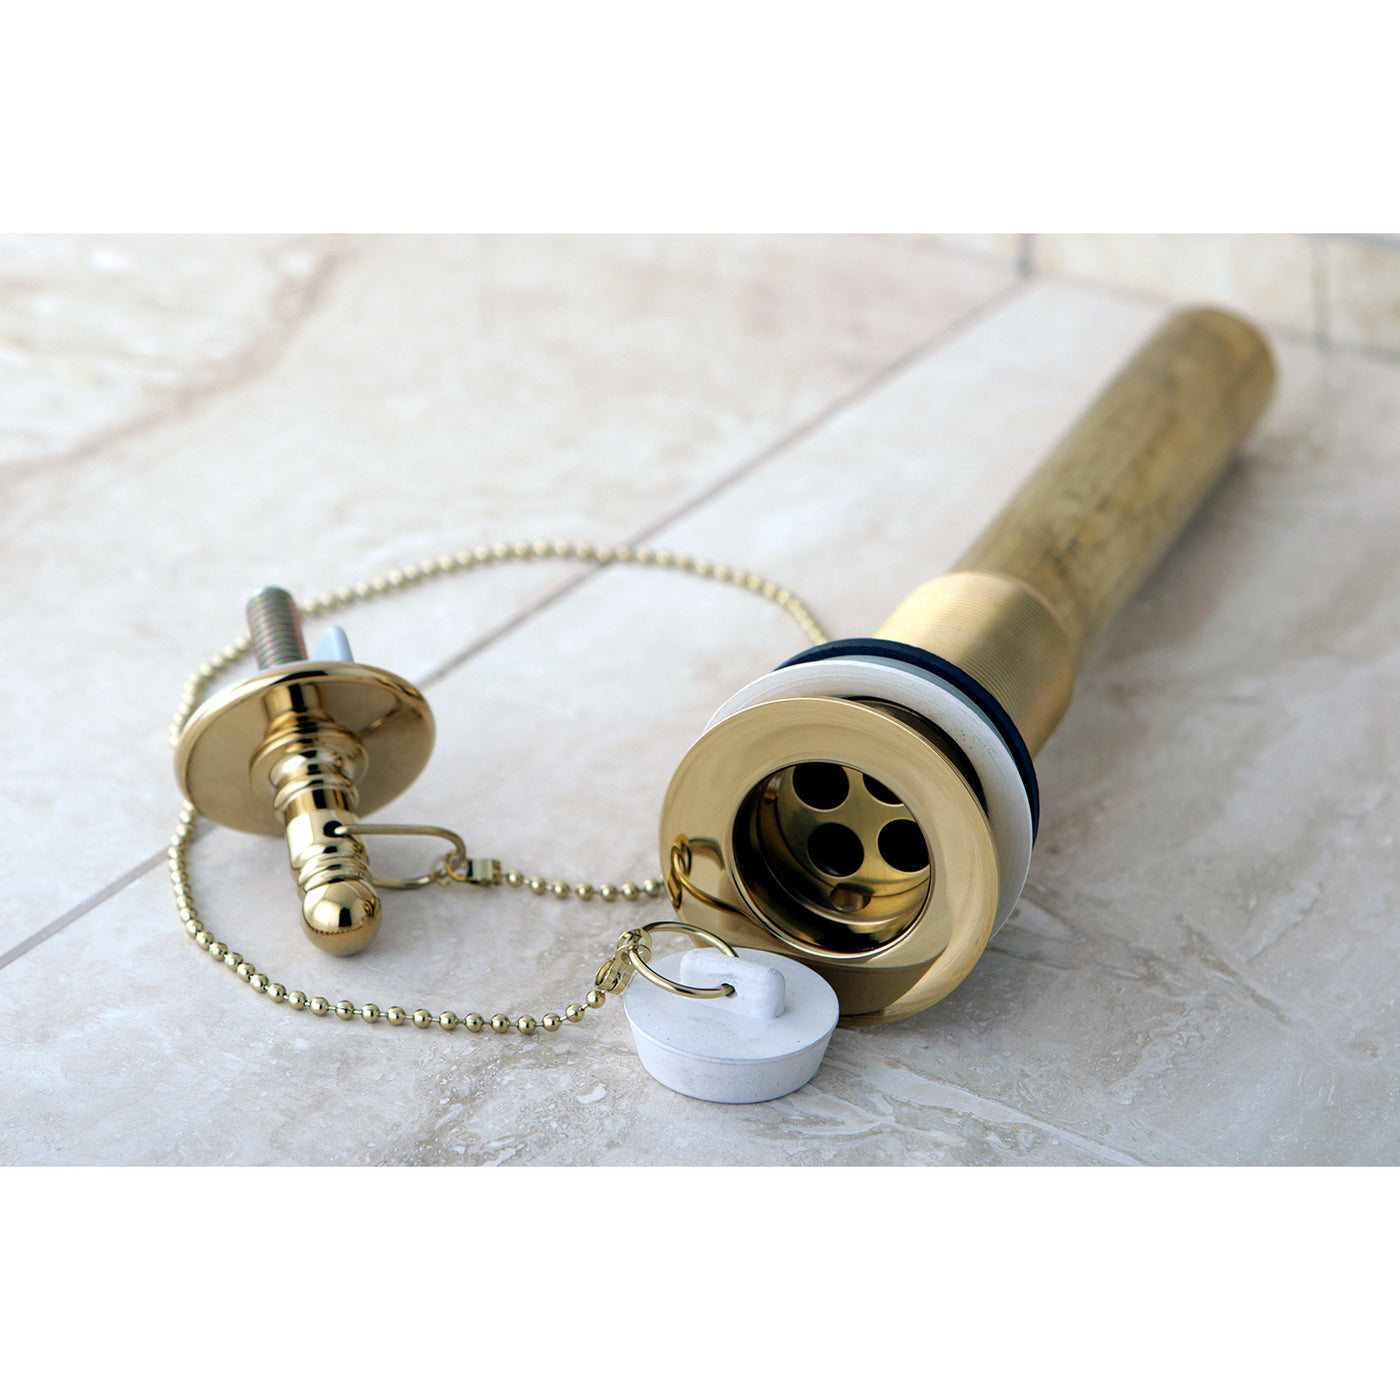 Elements of Design ED1002 Chain and Plug Pull-Out Bathroom Drain with Overflow, Polished Brass